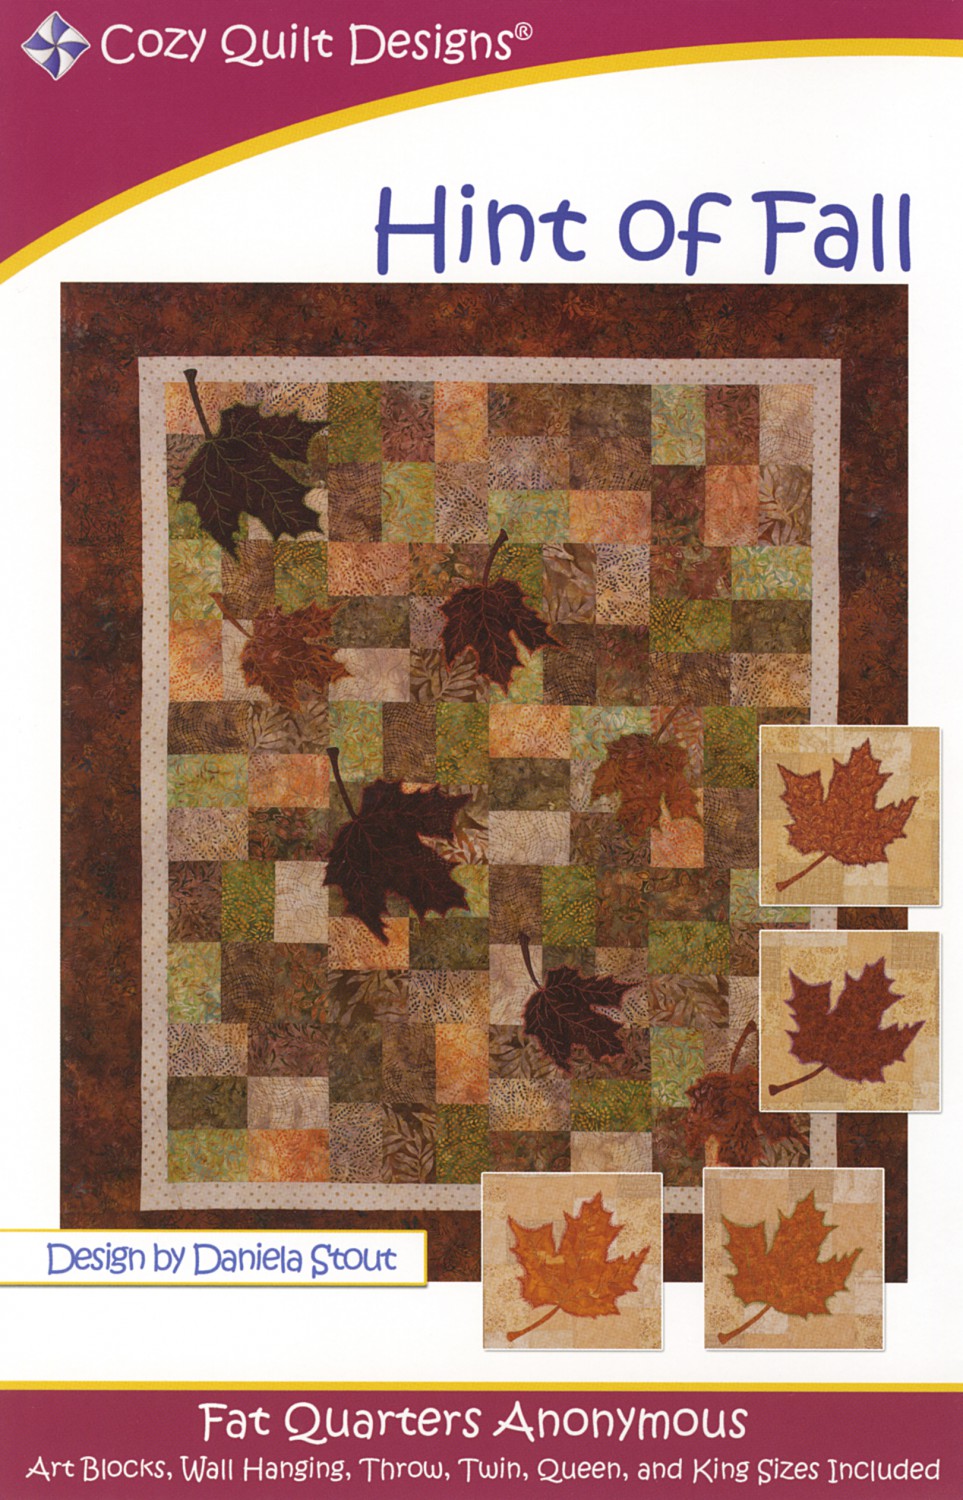 Cozy Quilt Designs Hint of Fall Quilt Pattern